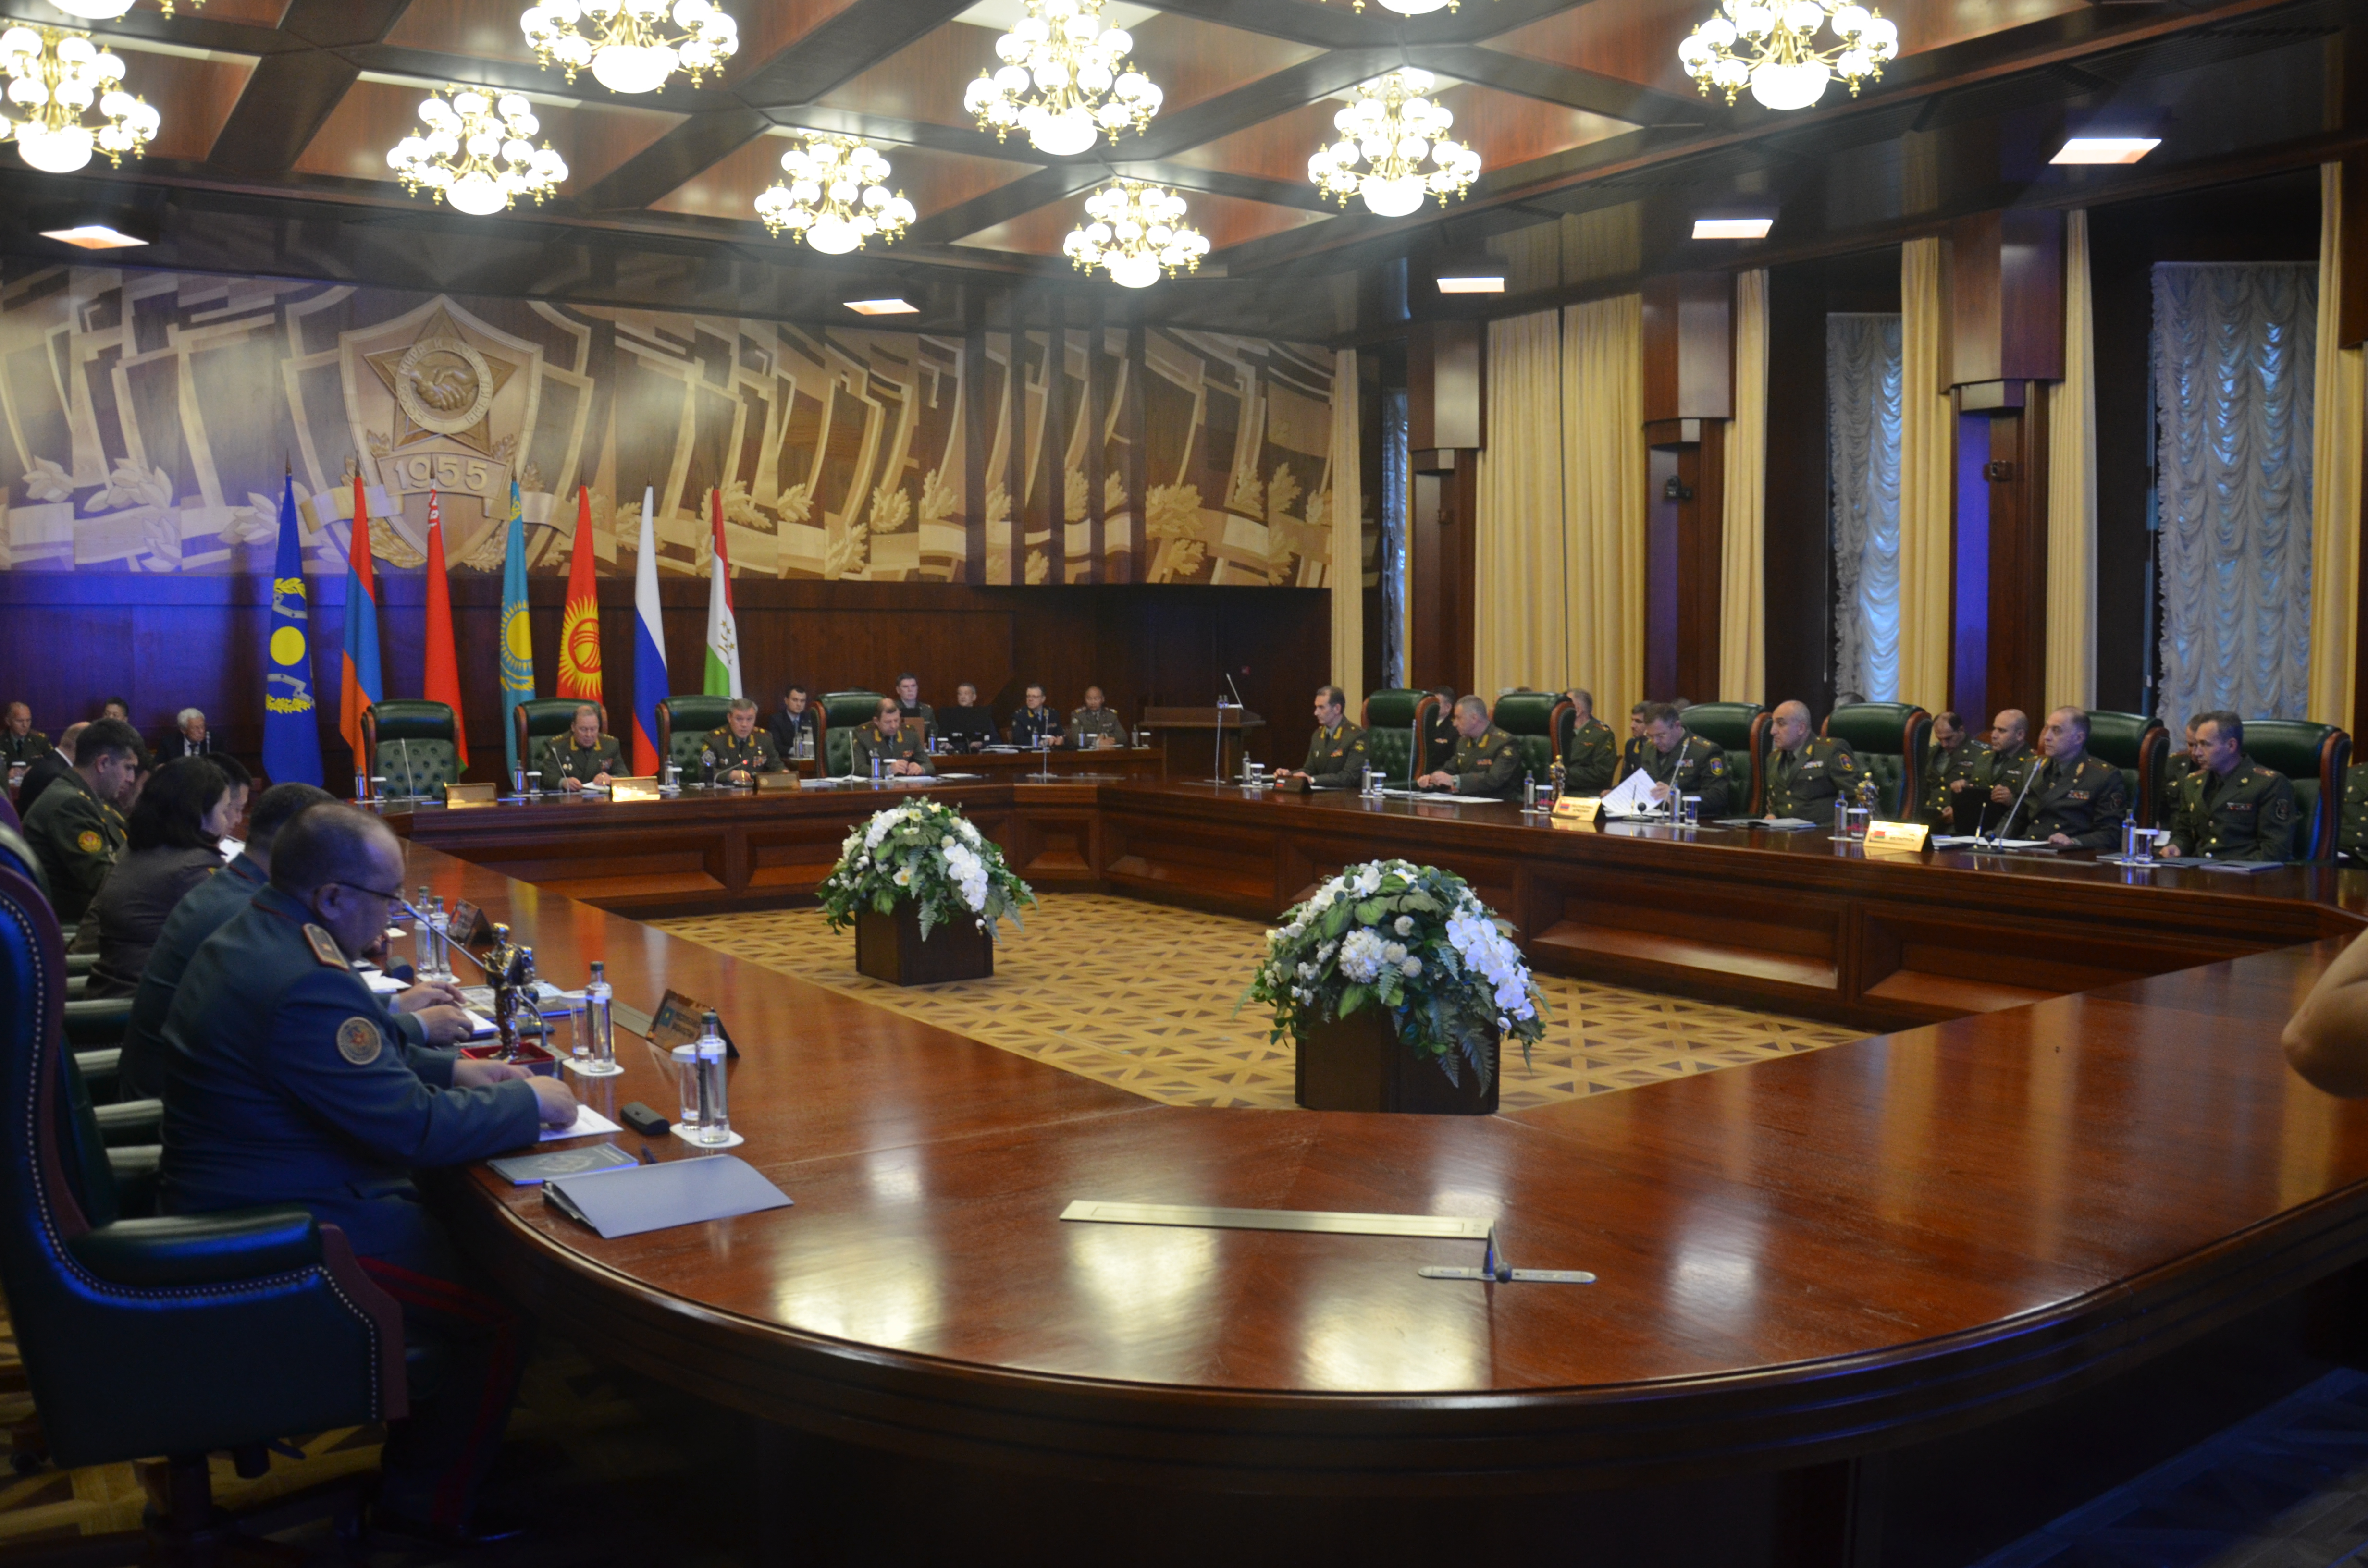 The 14th meeting of the CSTO Military Committee took place in Moscow